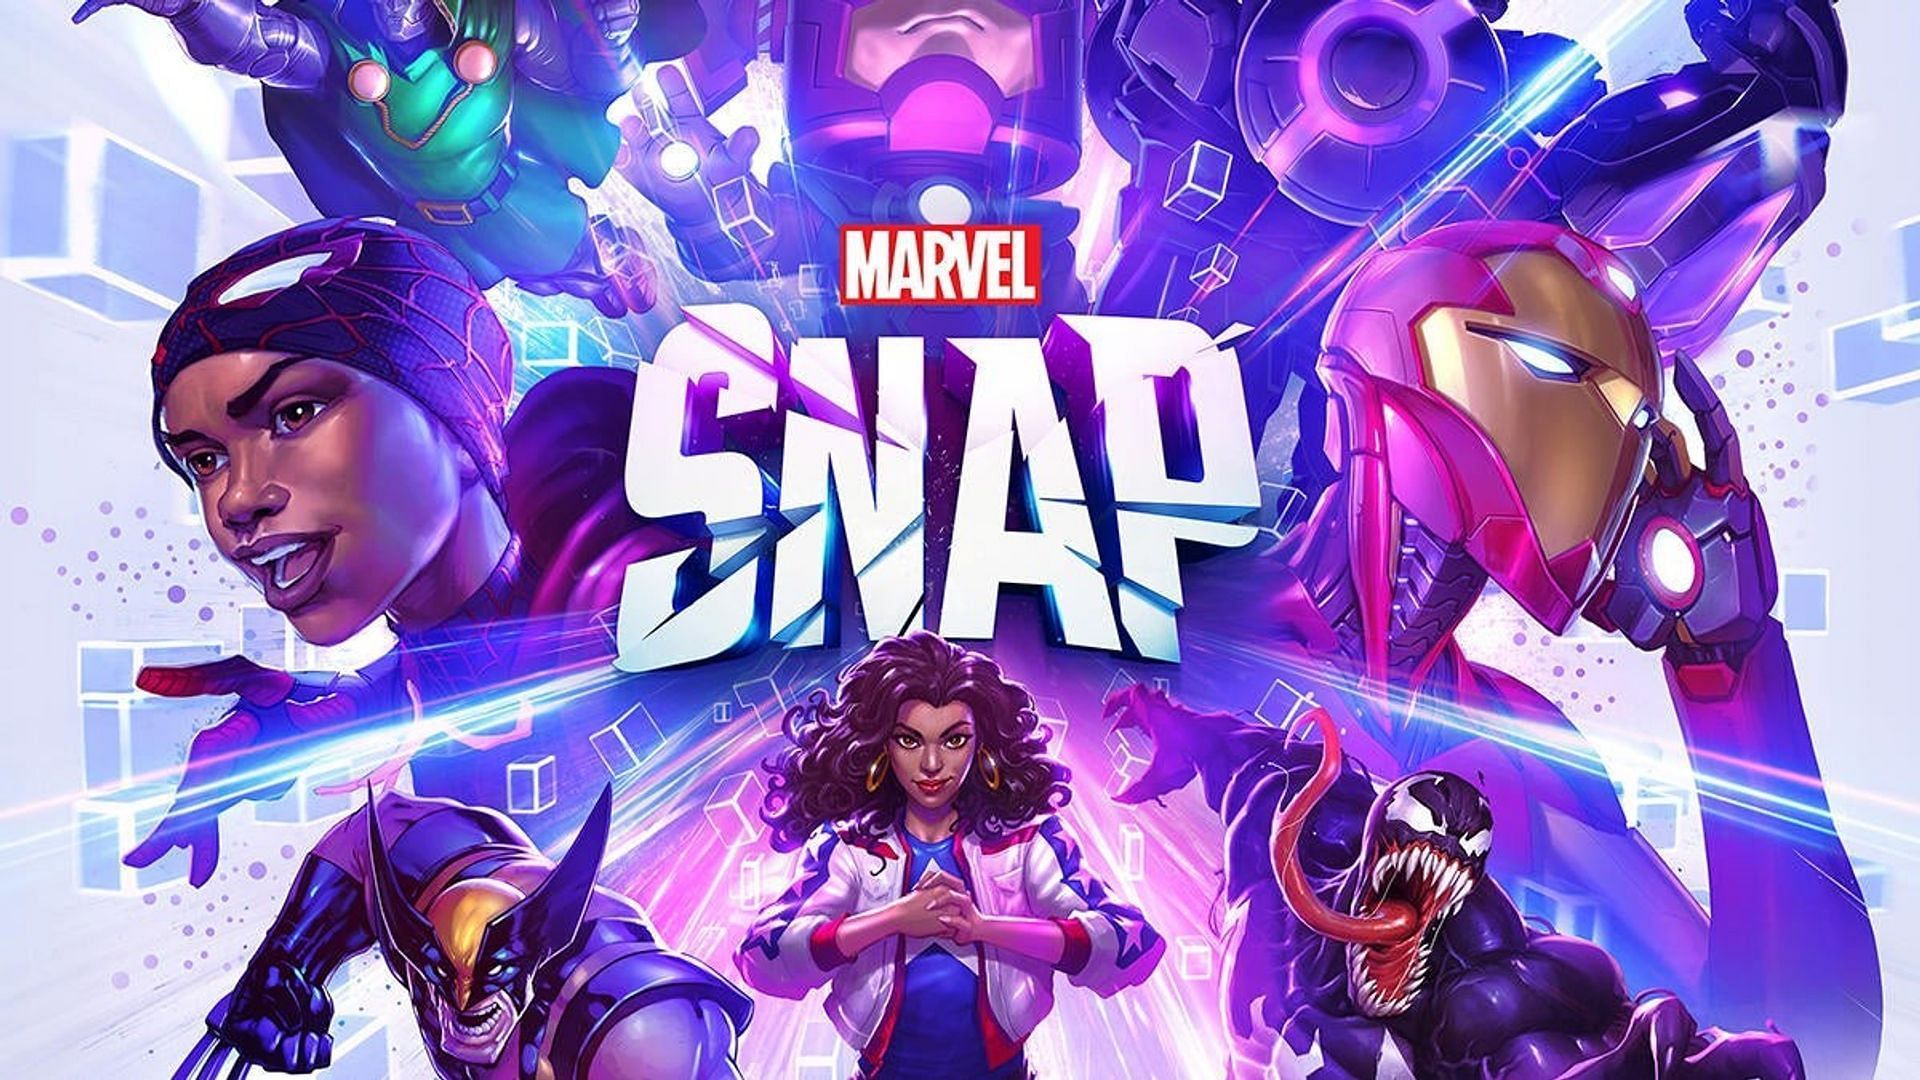 Will Marvel Snap be free to play?